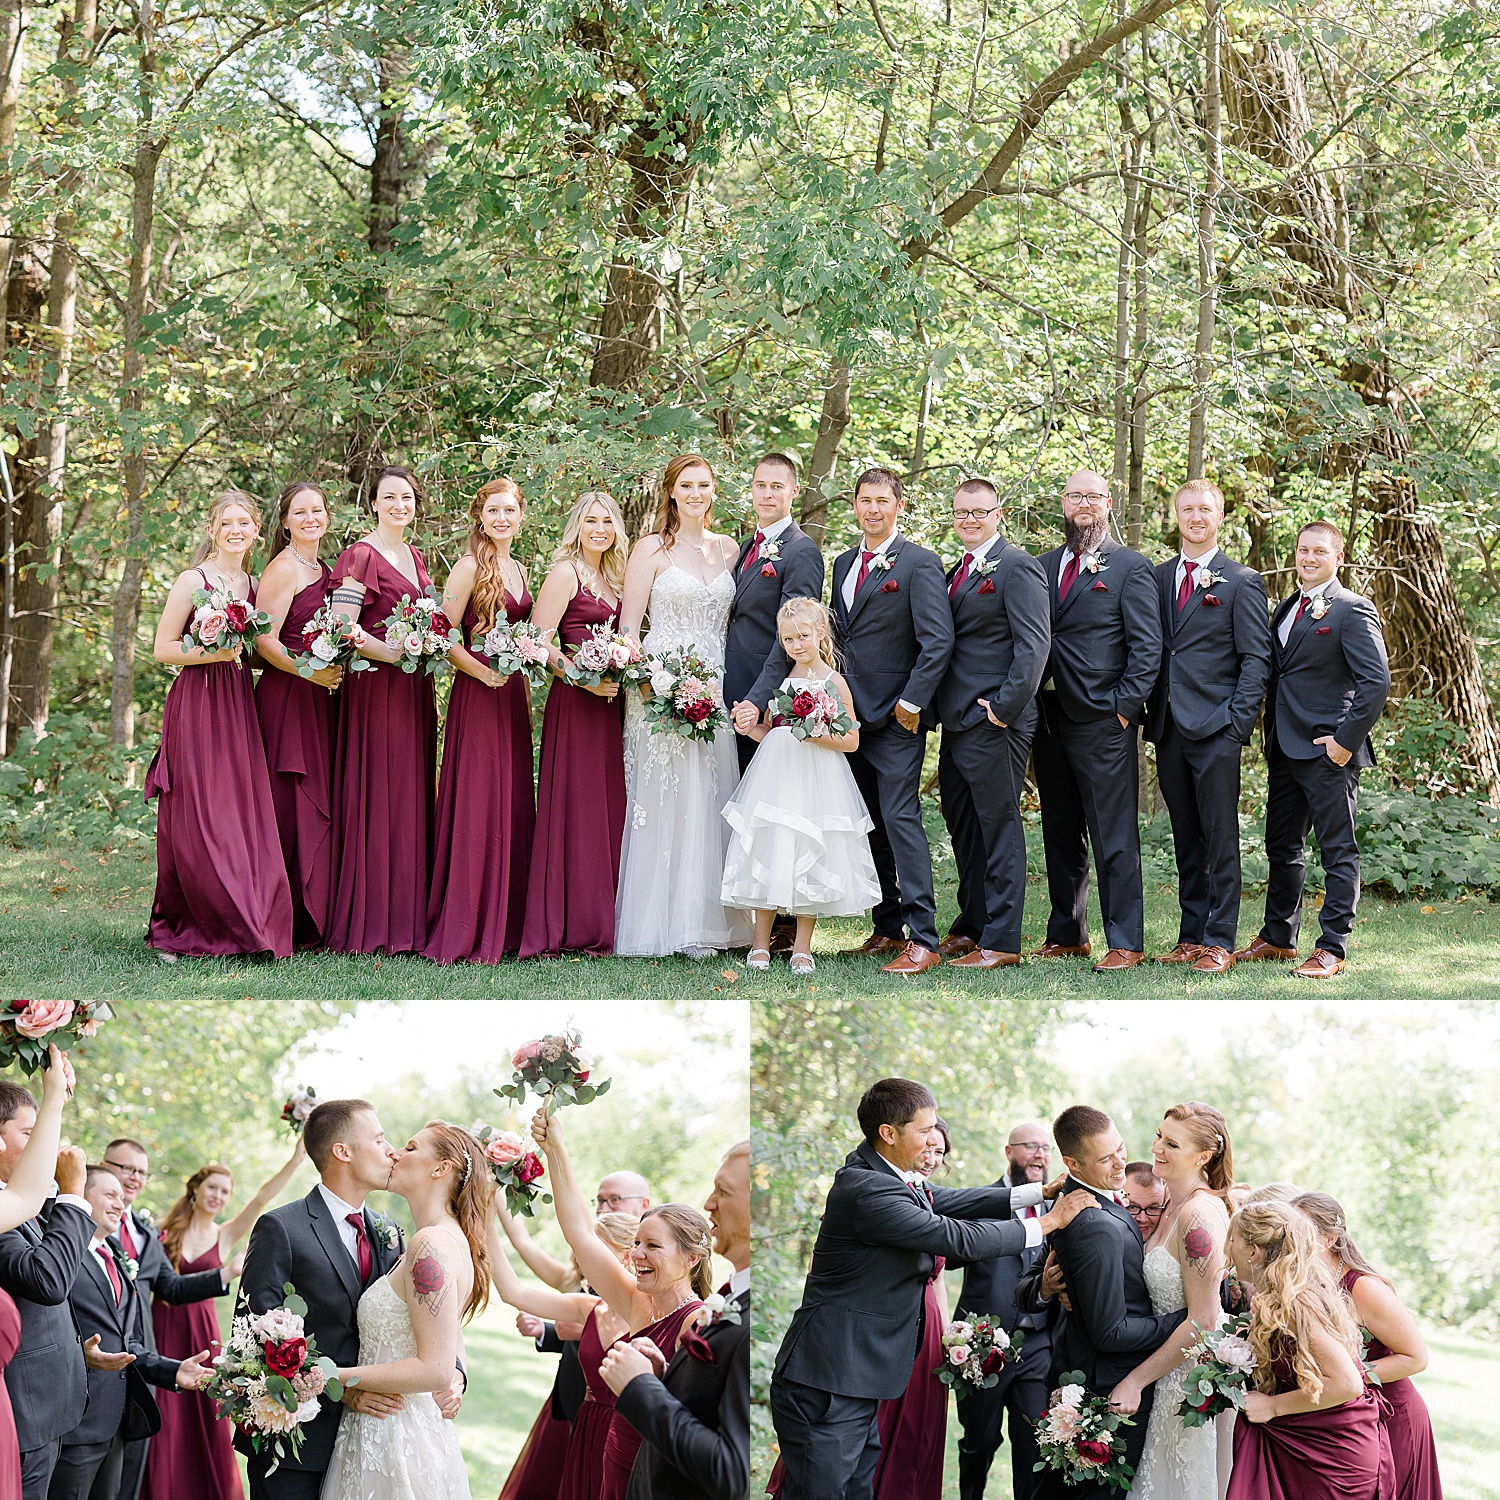 Full wedding party photos with bridesmaids and groomsmen cheering for newly married bride and groom 